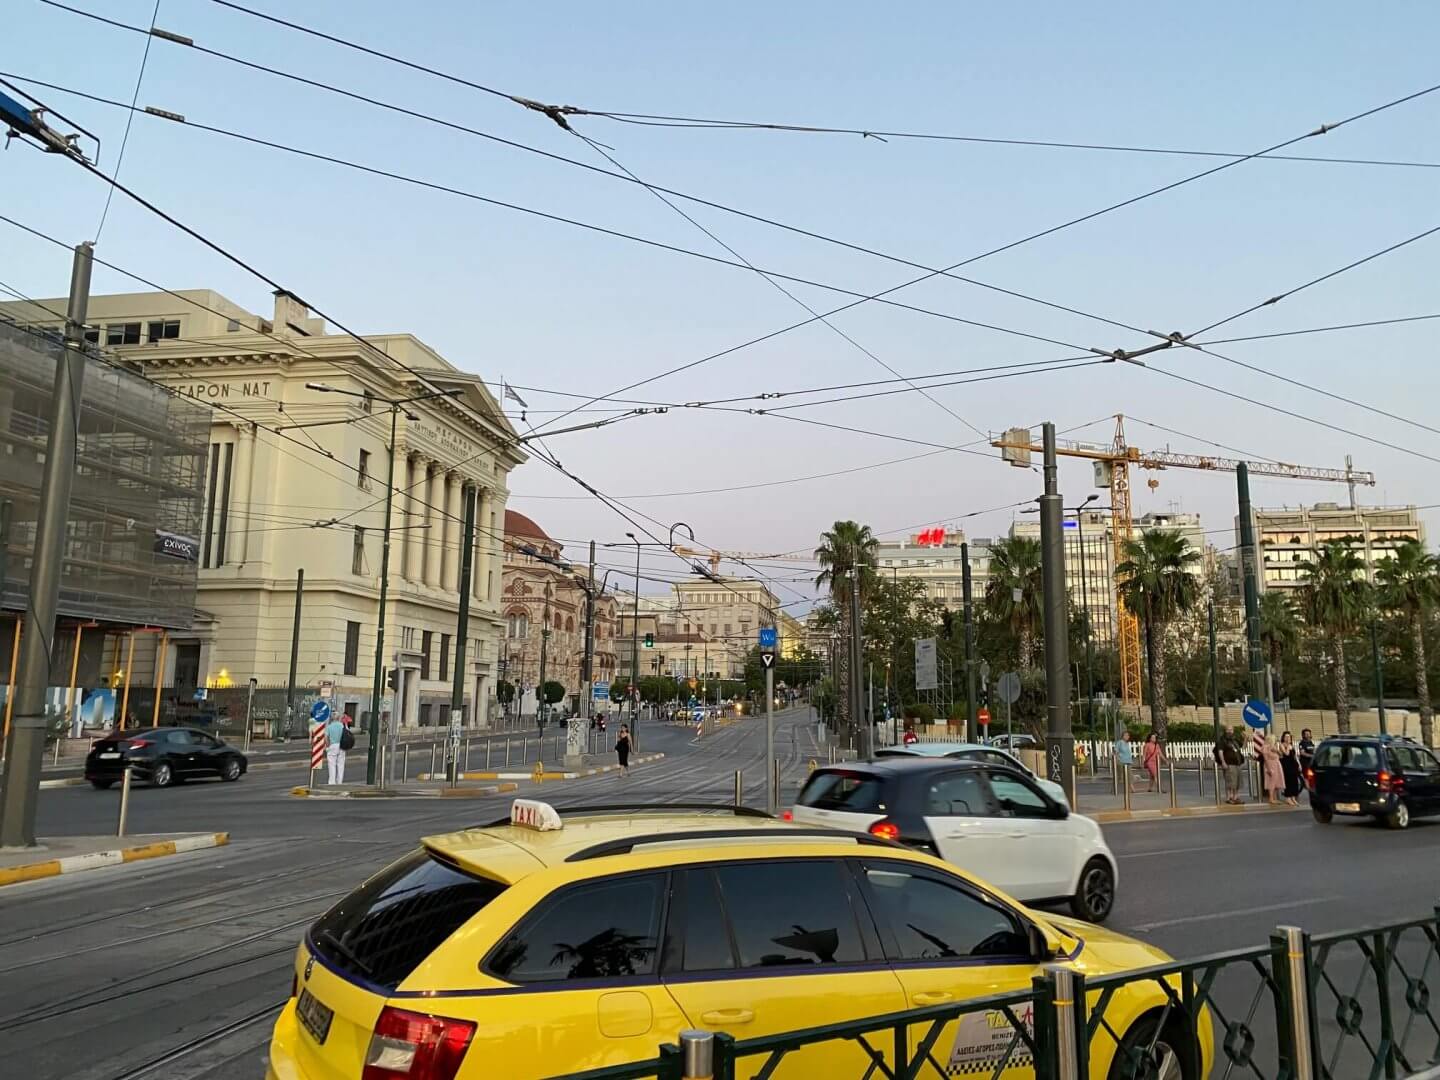 Taxis and cars on the Piraeus roads with tram cables overhead